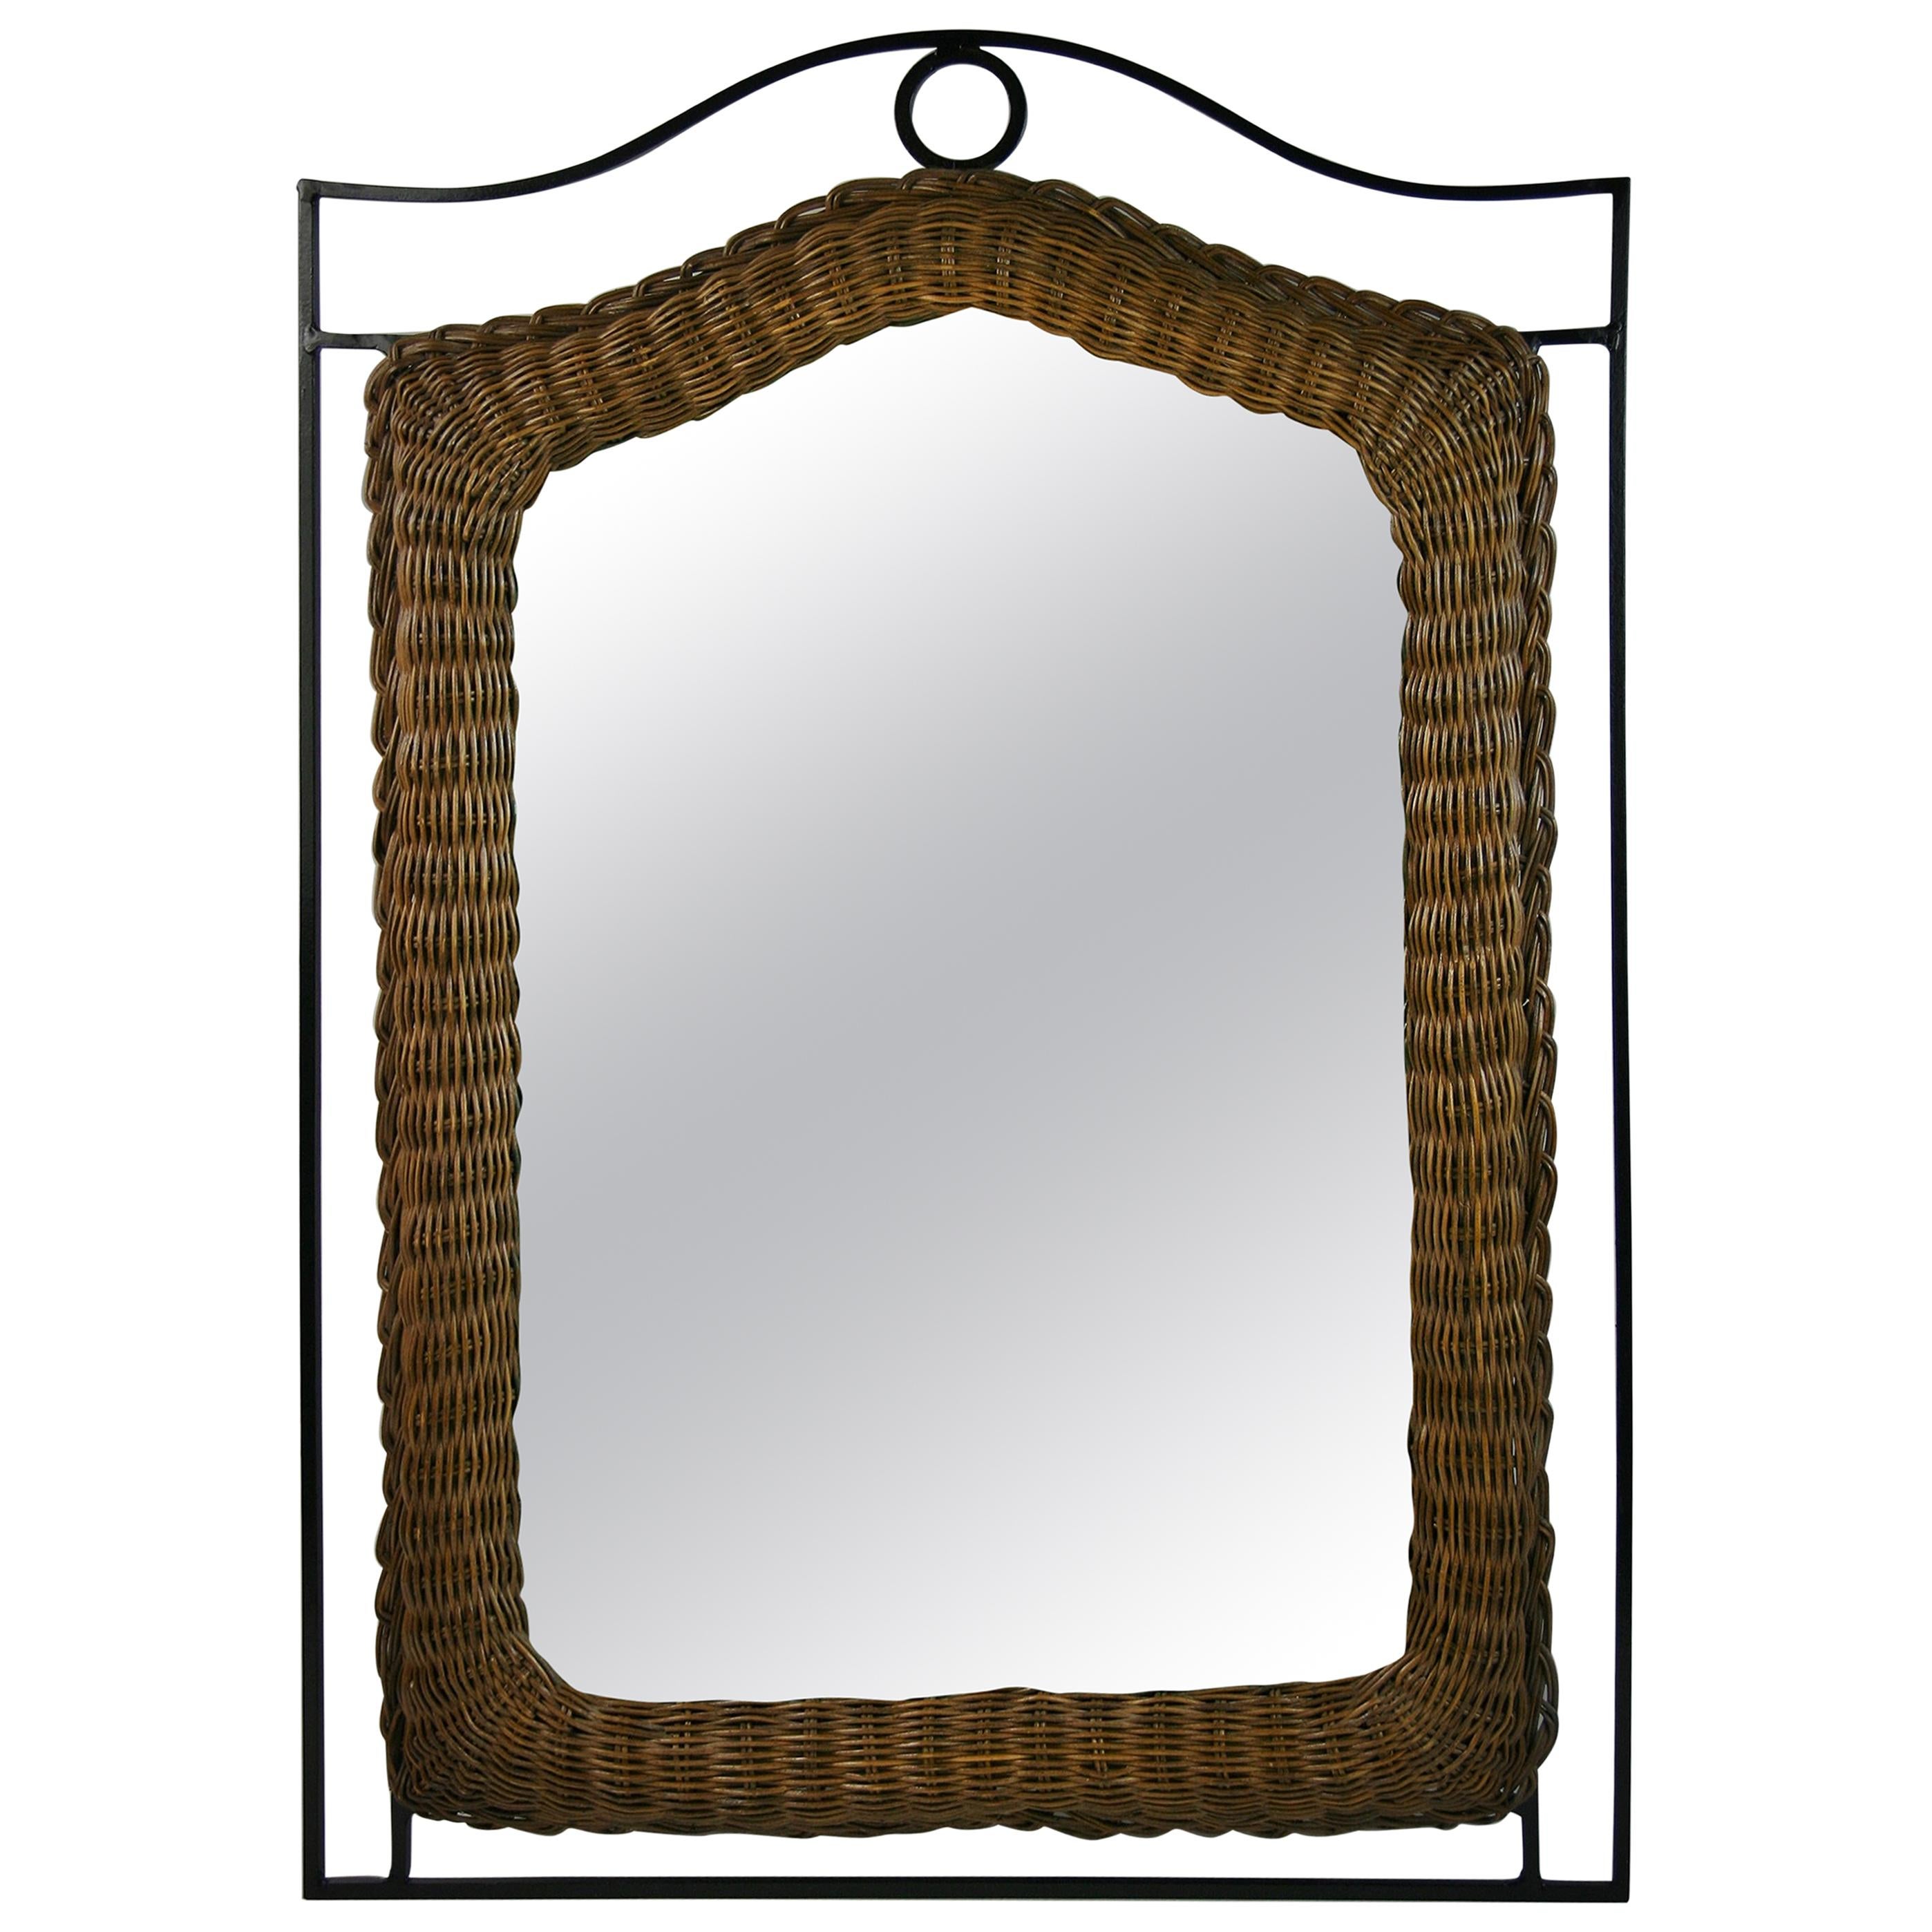 Metal and Wicker Mirror